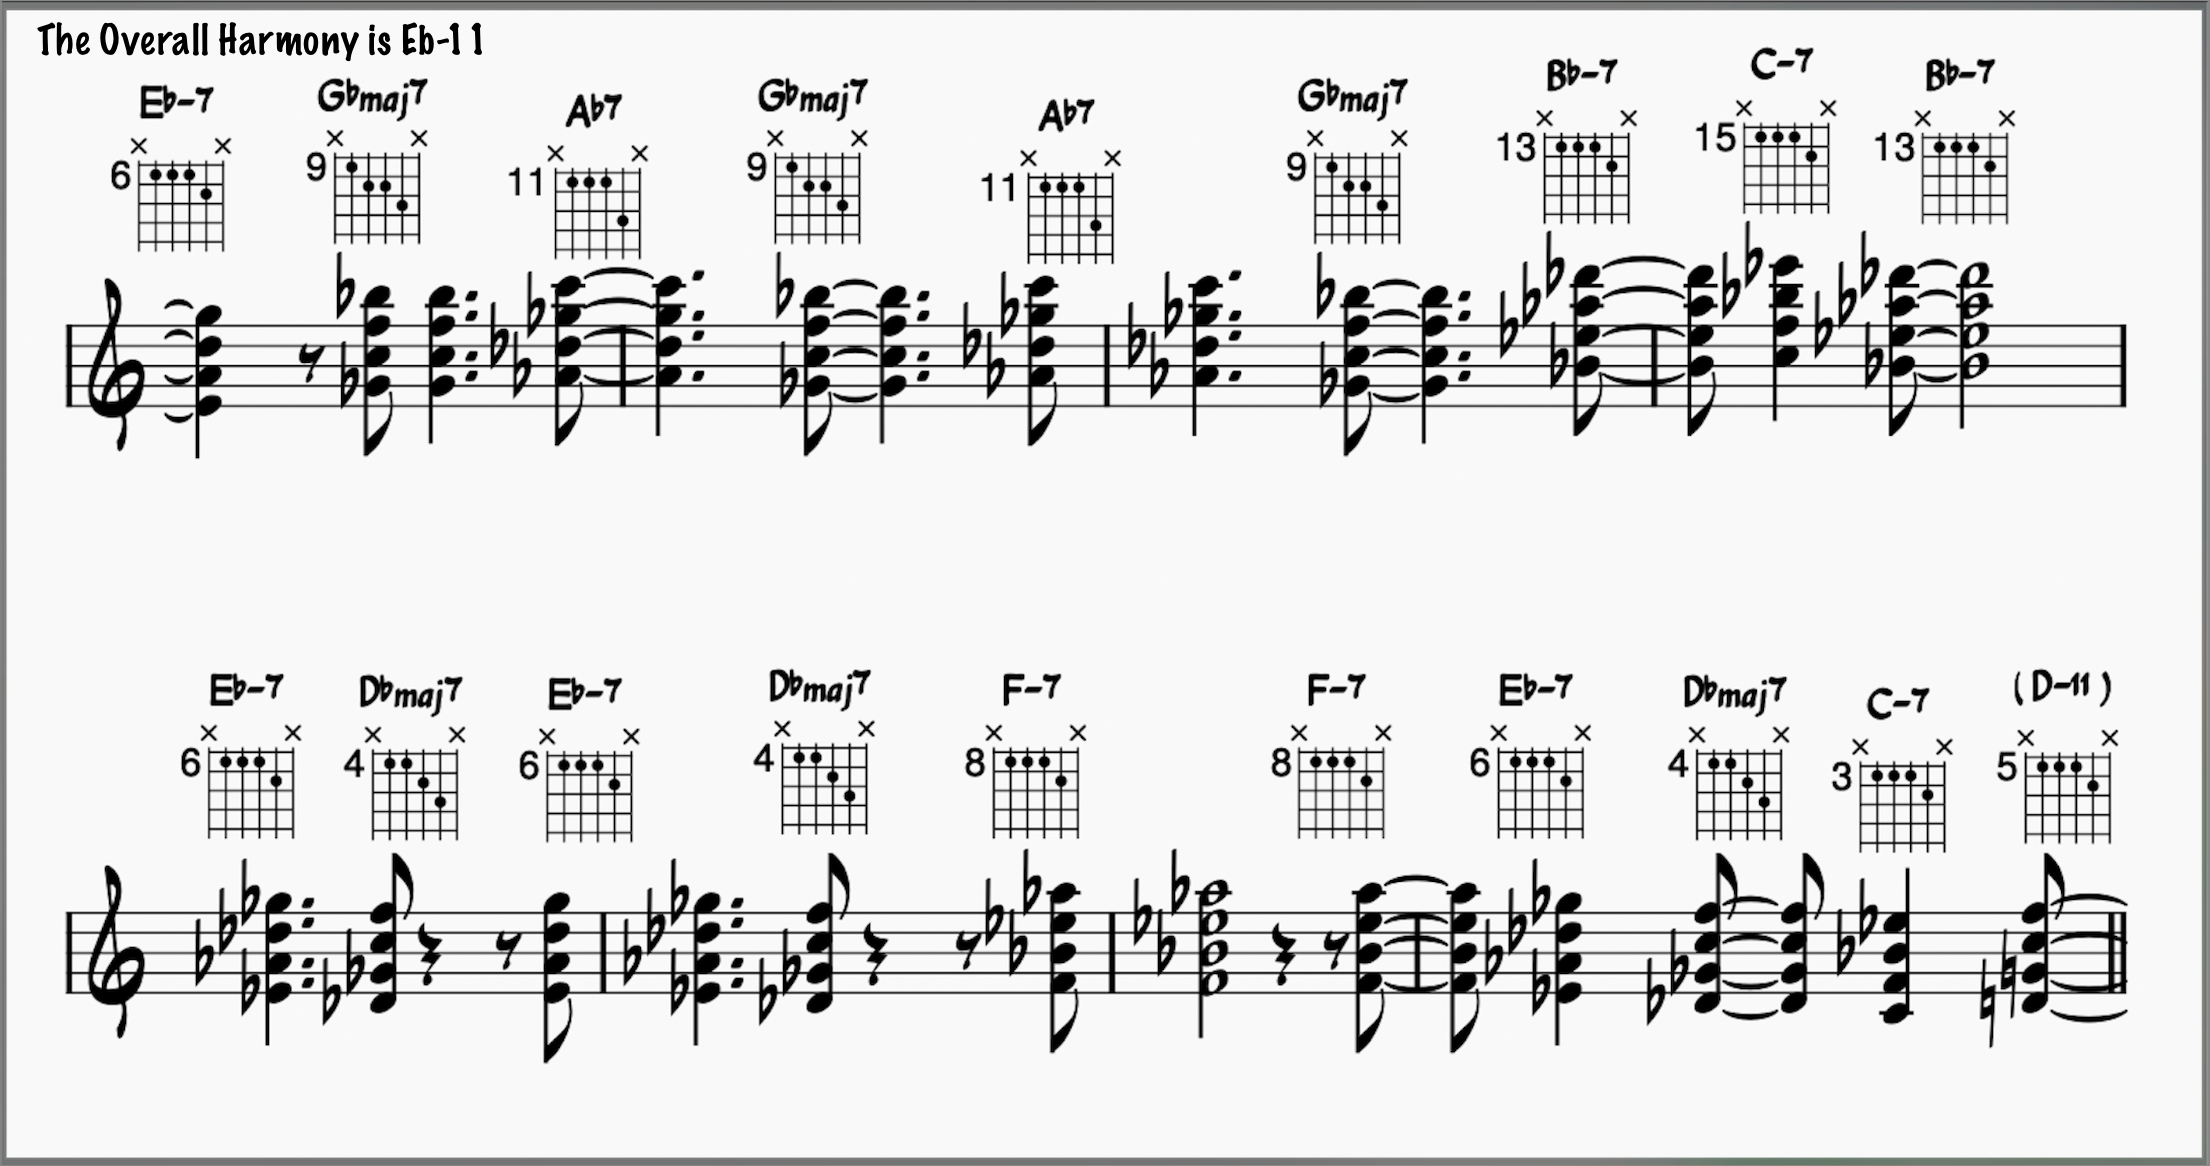 B section of the modal tune Impressions with chord comping and chord charts.